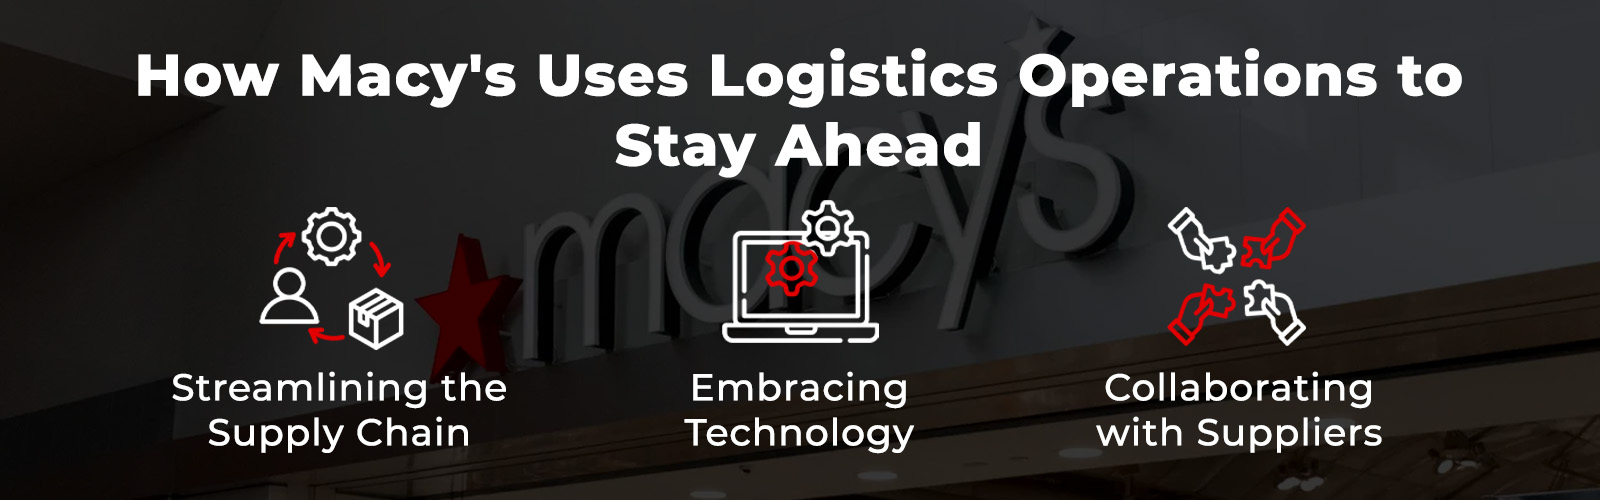 How Macy stays ahead of competition with Logistics Operations